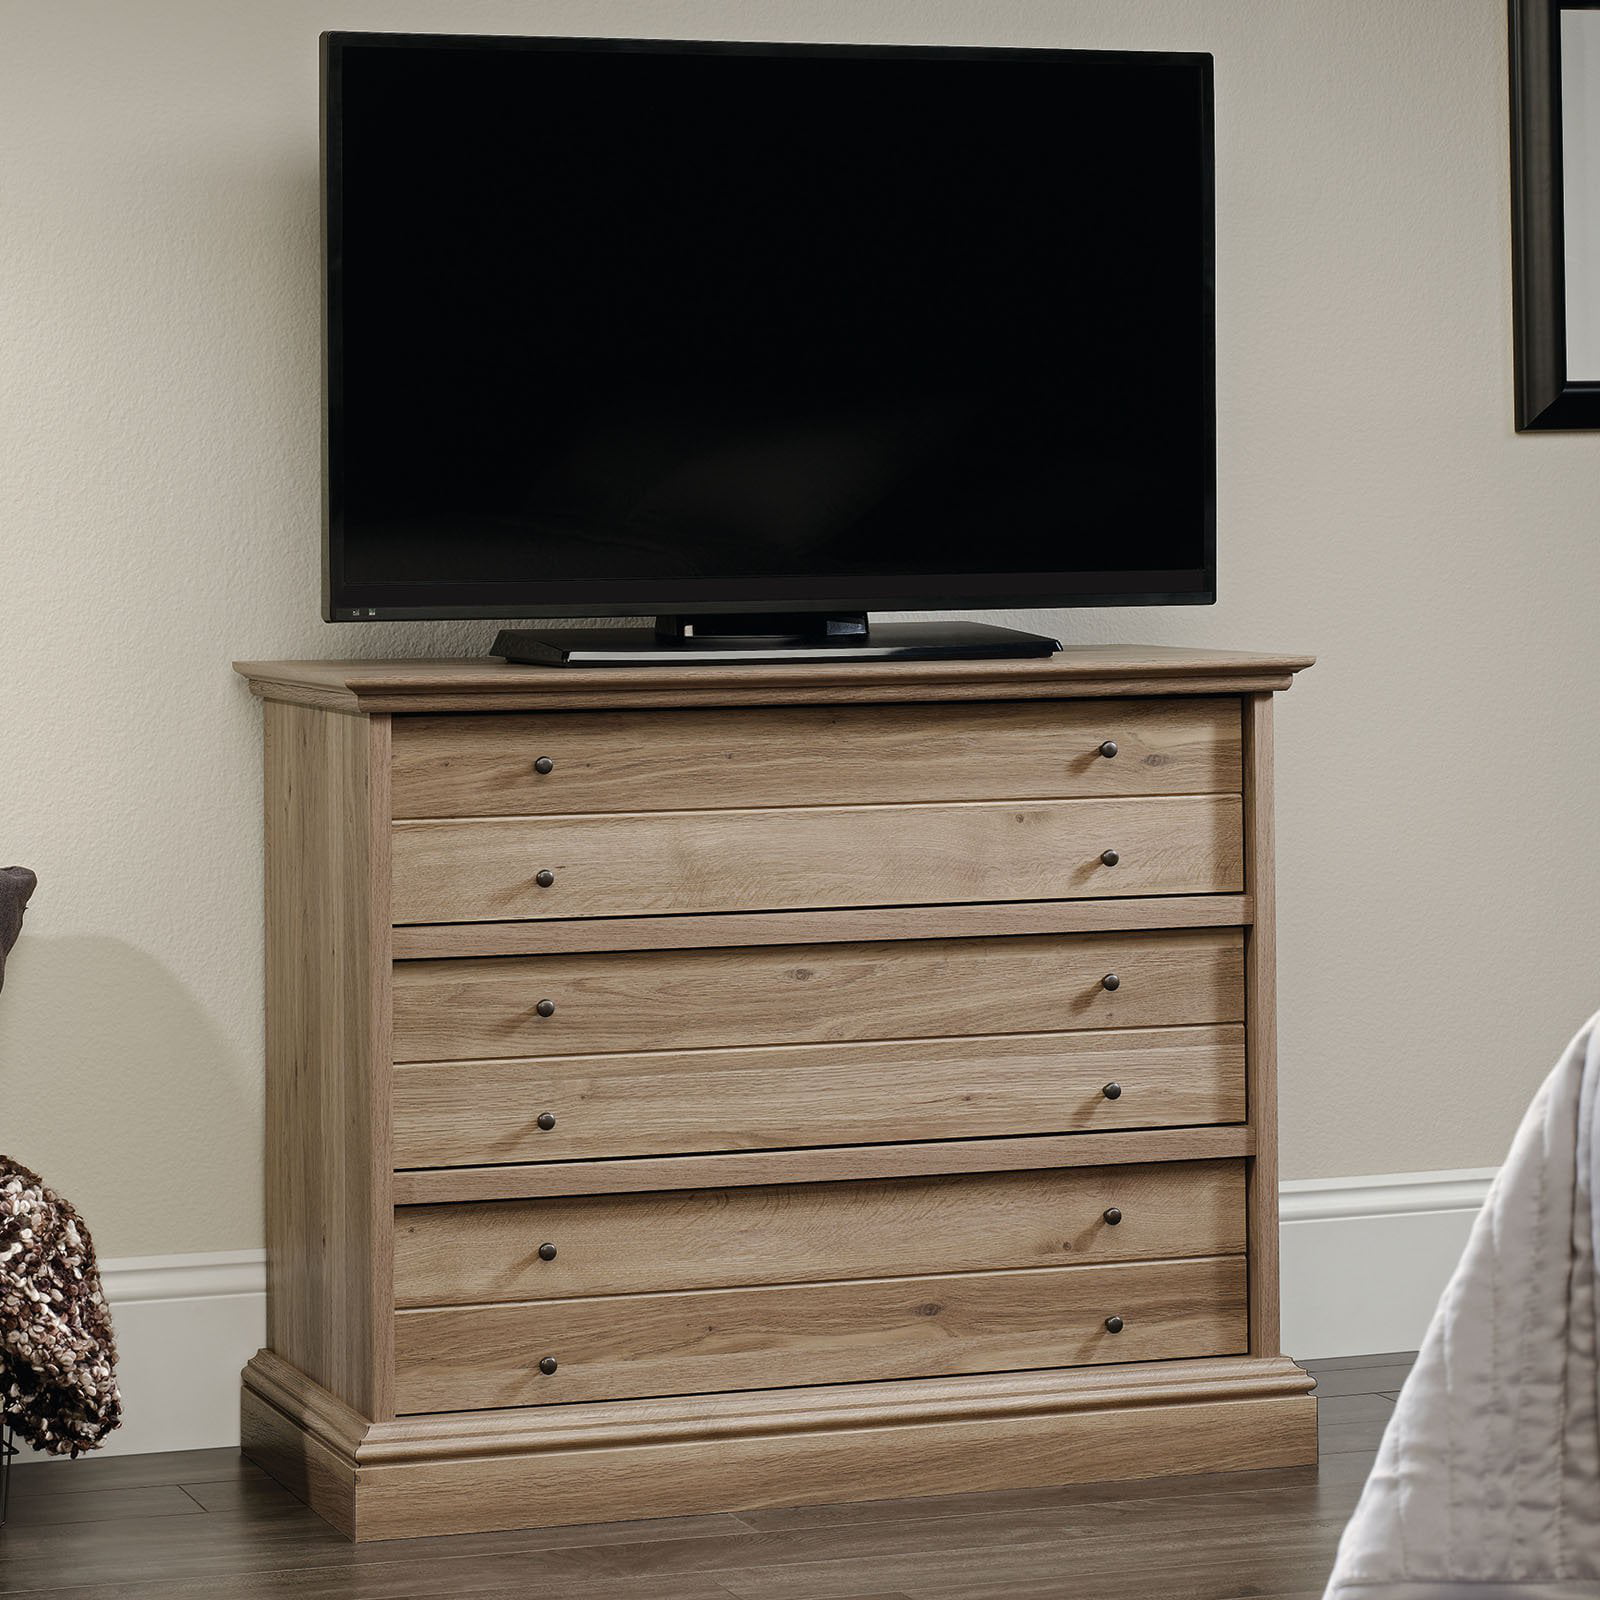 Sauder Barrister Lane 3-Drawer TV Stand Media Chest for TV's up to 40 chest of drawers with tv on top